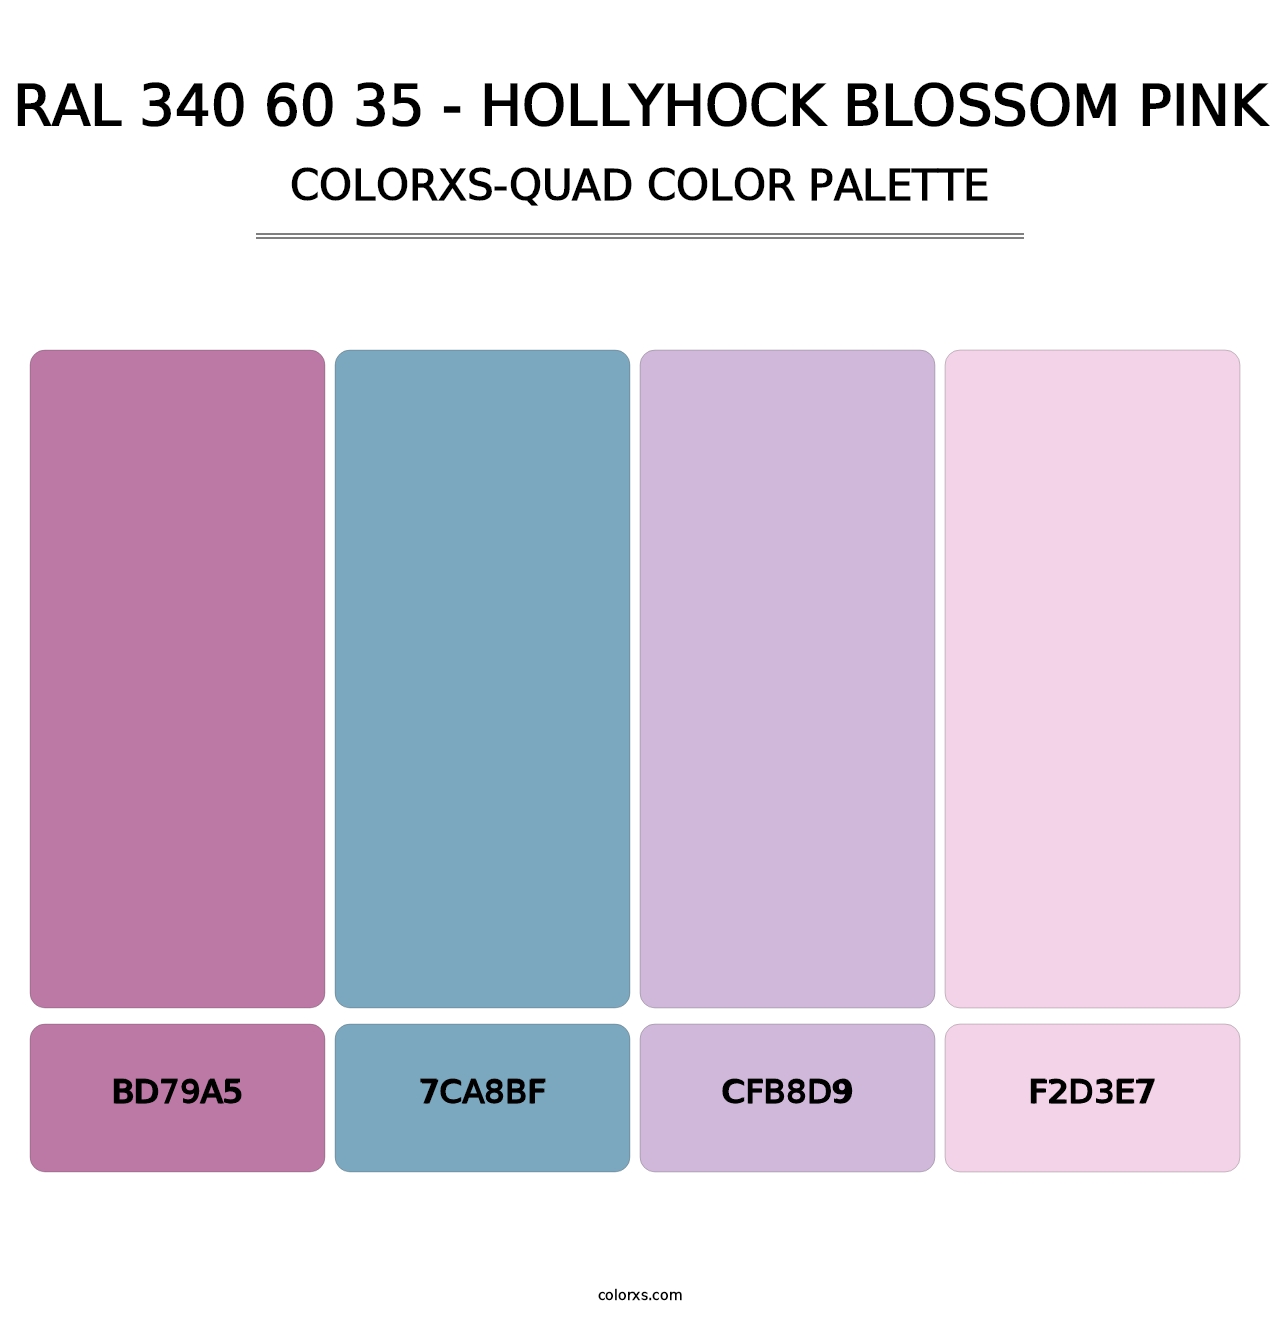 RAL 340 60 35 - Hollyhock Blossom Pink - Colorxs Quad Palette